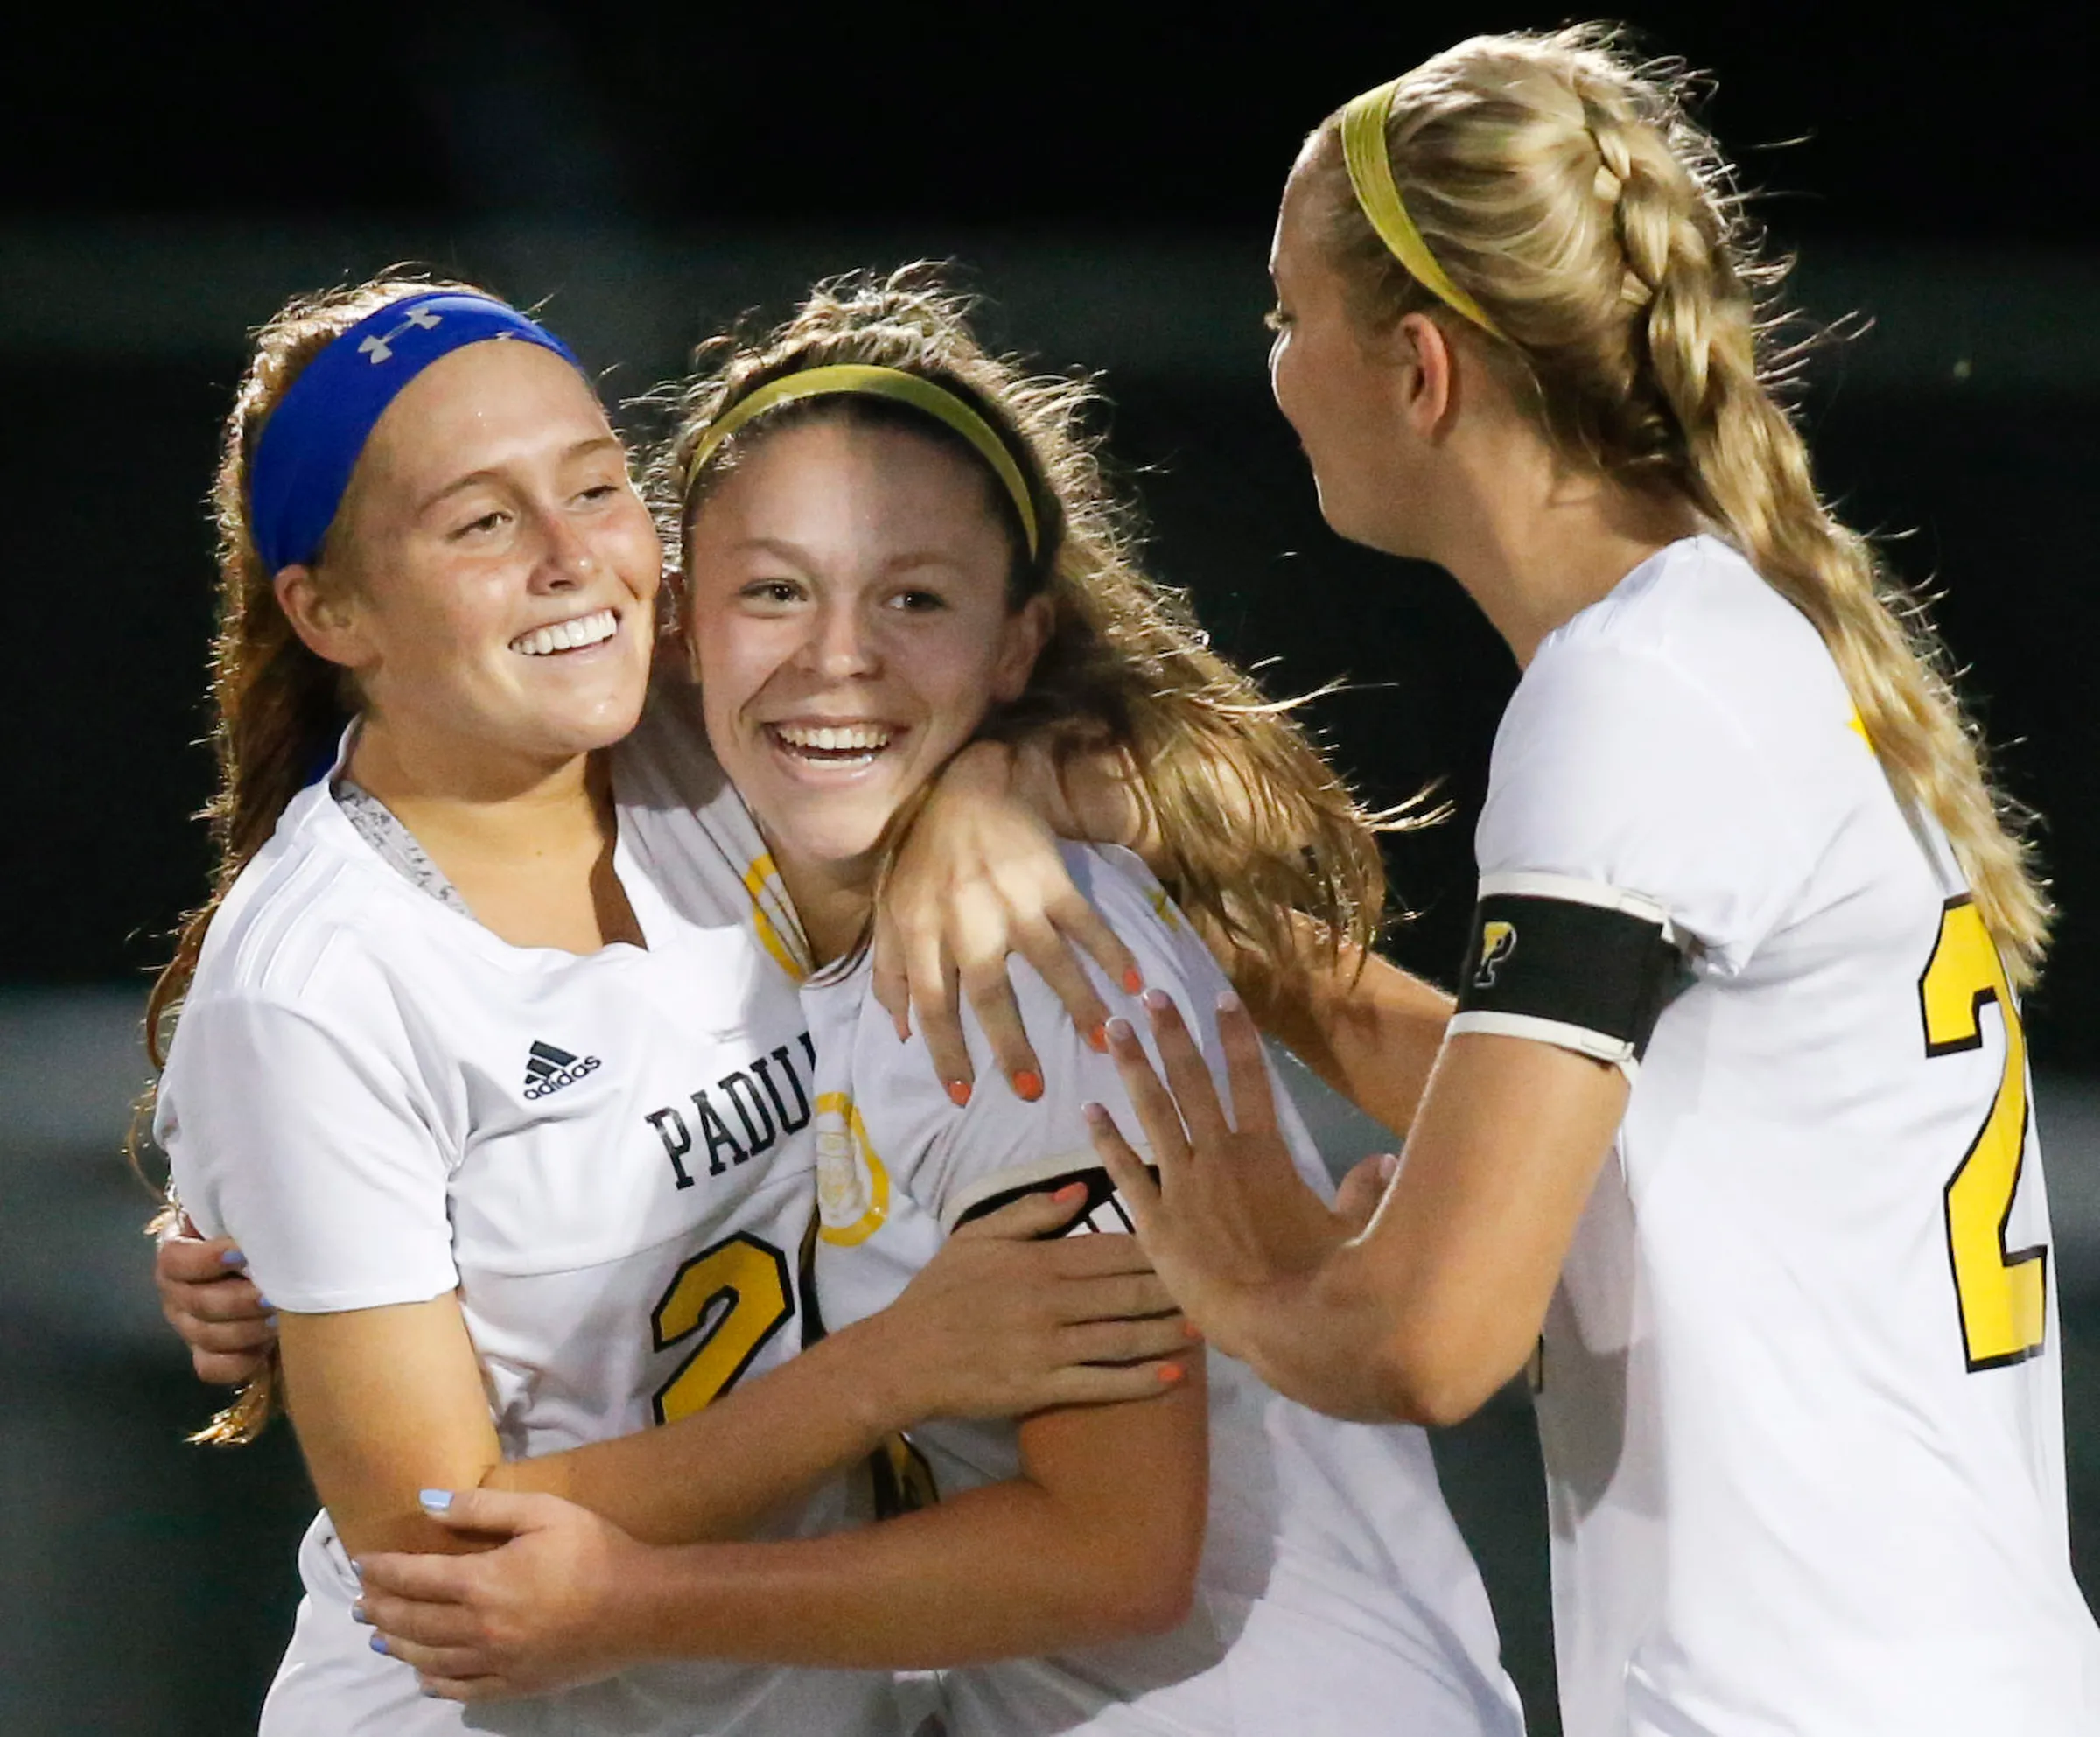 Padua's Sarah Brush (center) celebrates her opening goal with Mackenzie Scully (left) and Molly Drach in the first half against Caesar Rodney in the DIAA Division I state title game at Smyrna High School Friday.